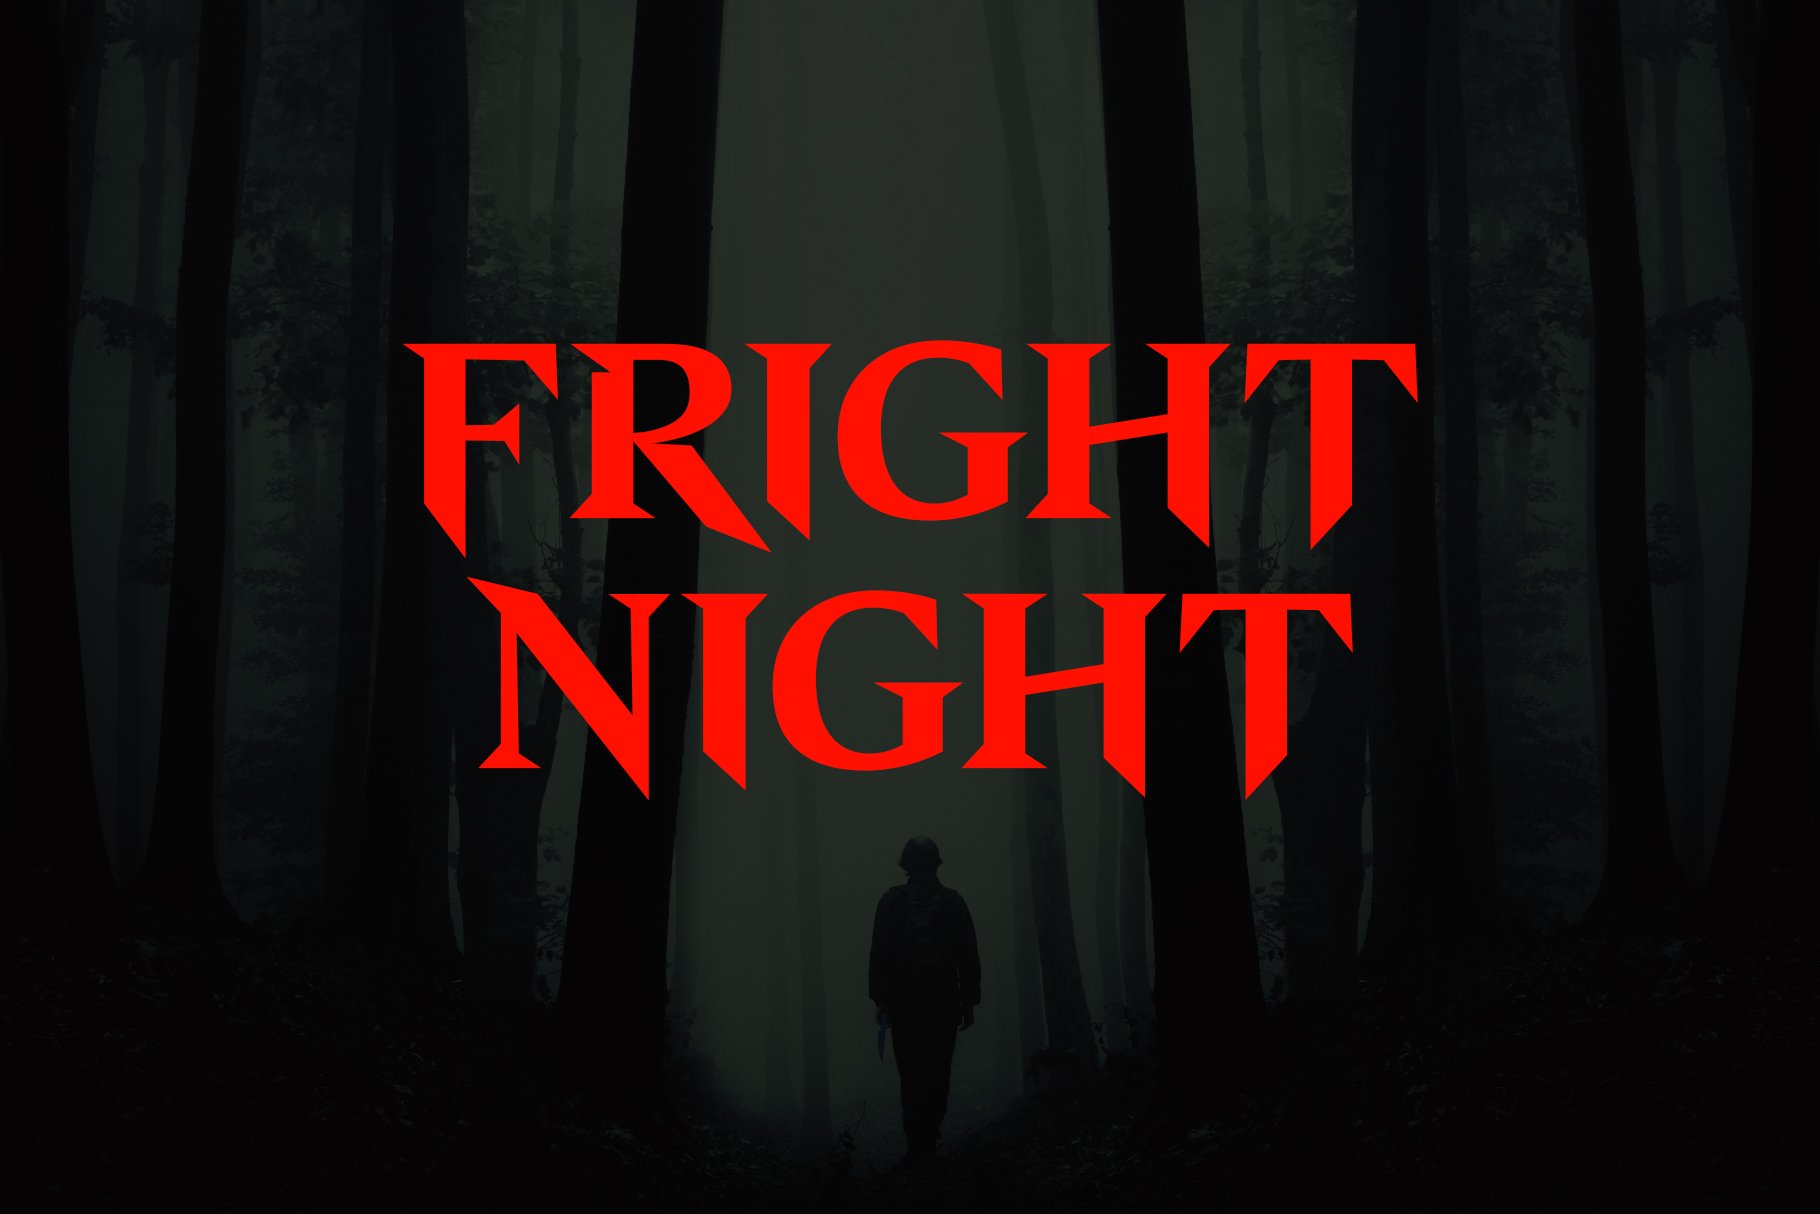 Fright Night cover image.